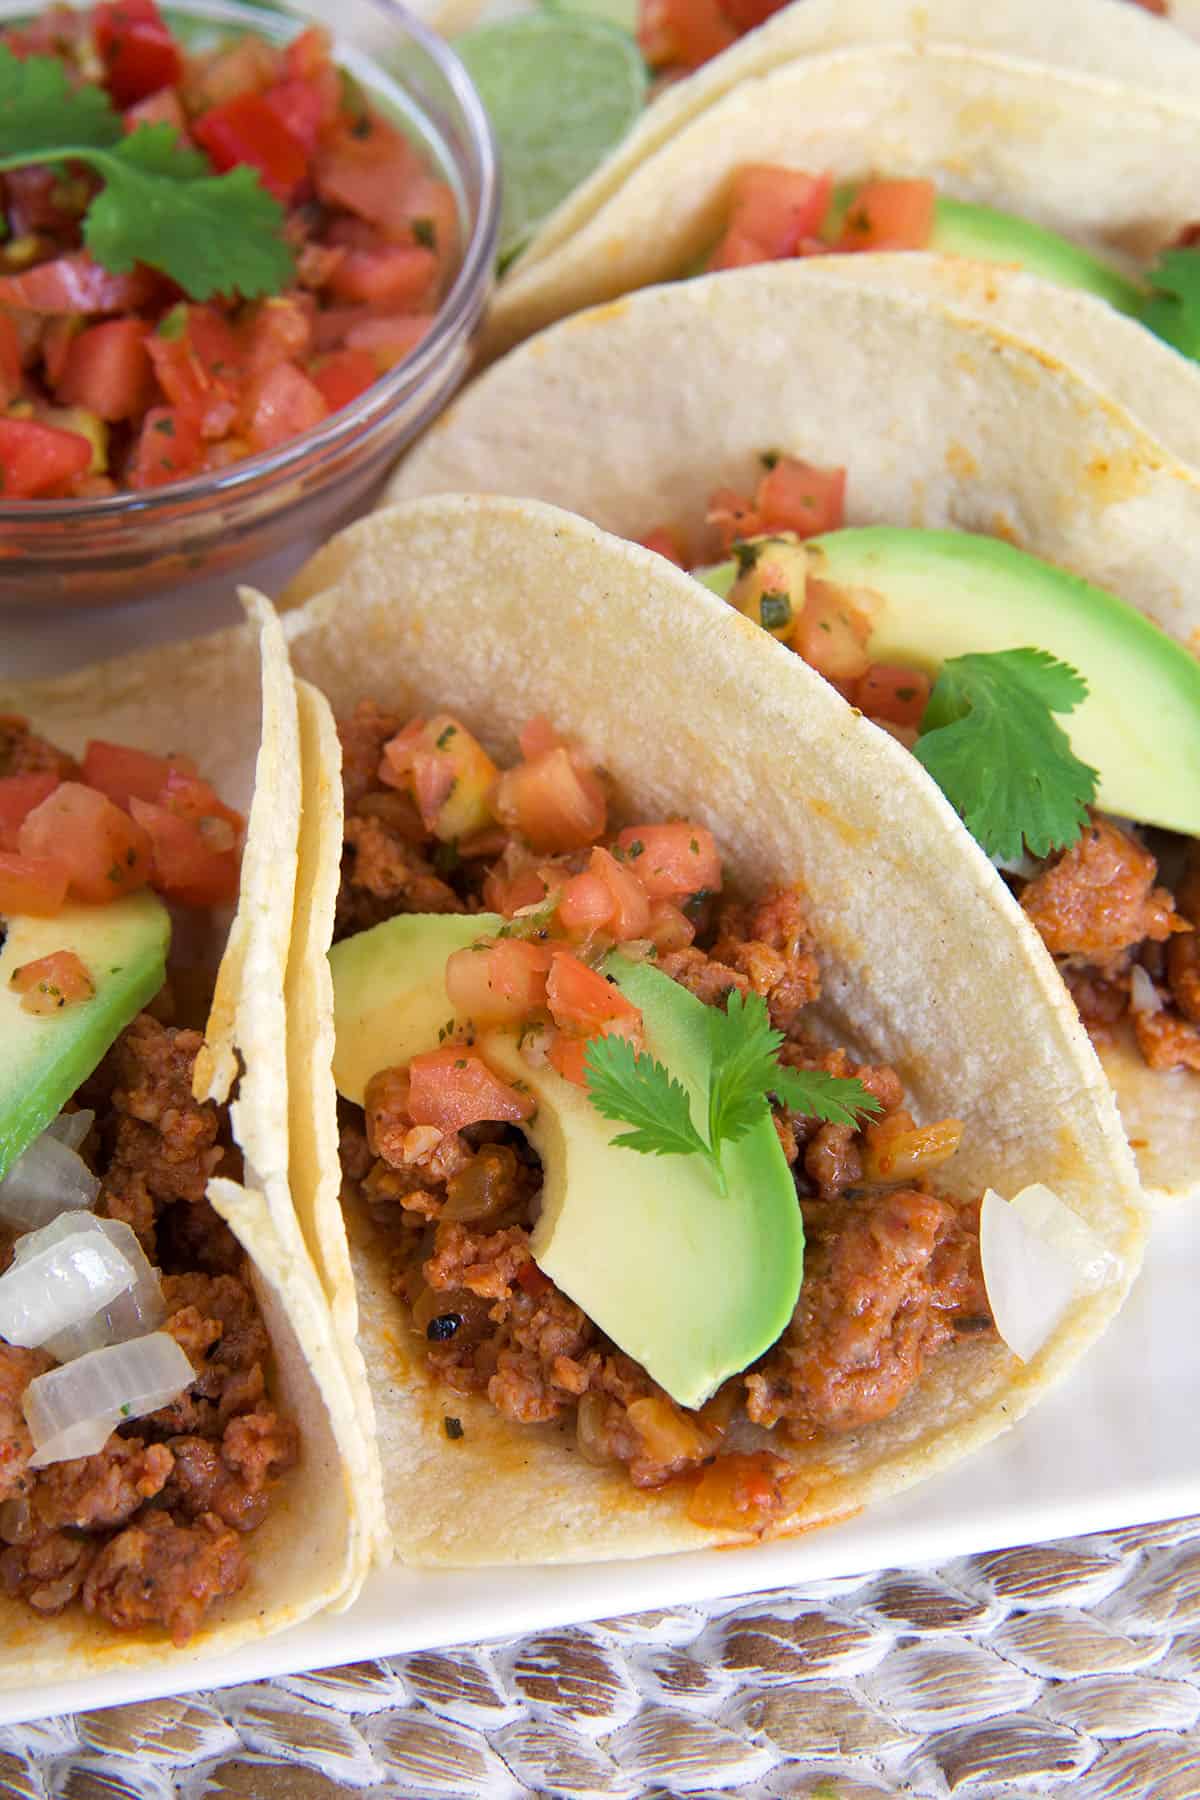 Several tacos are garnished and placed on a white plate with a small bowl filled with salsa.